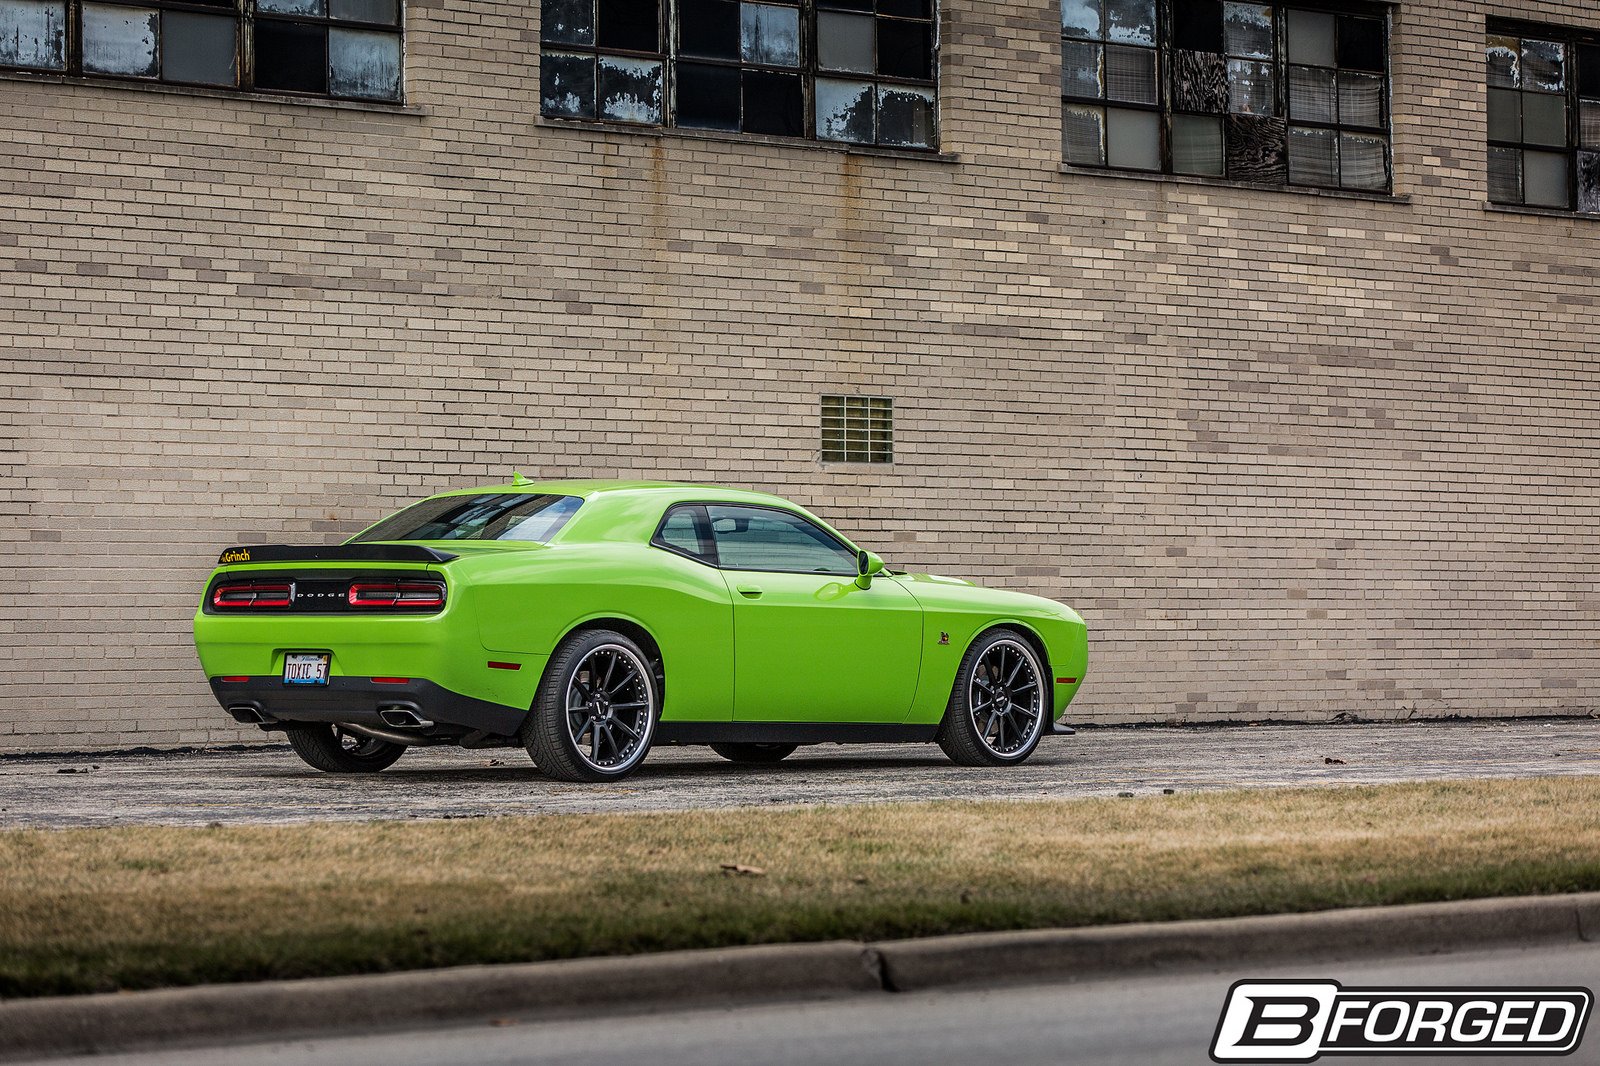 b forged, Wheel, Dodge, Challenger, Cars, Green Wallpaper